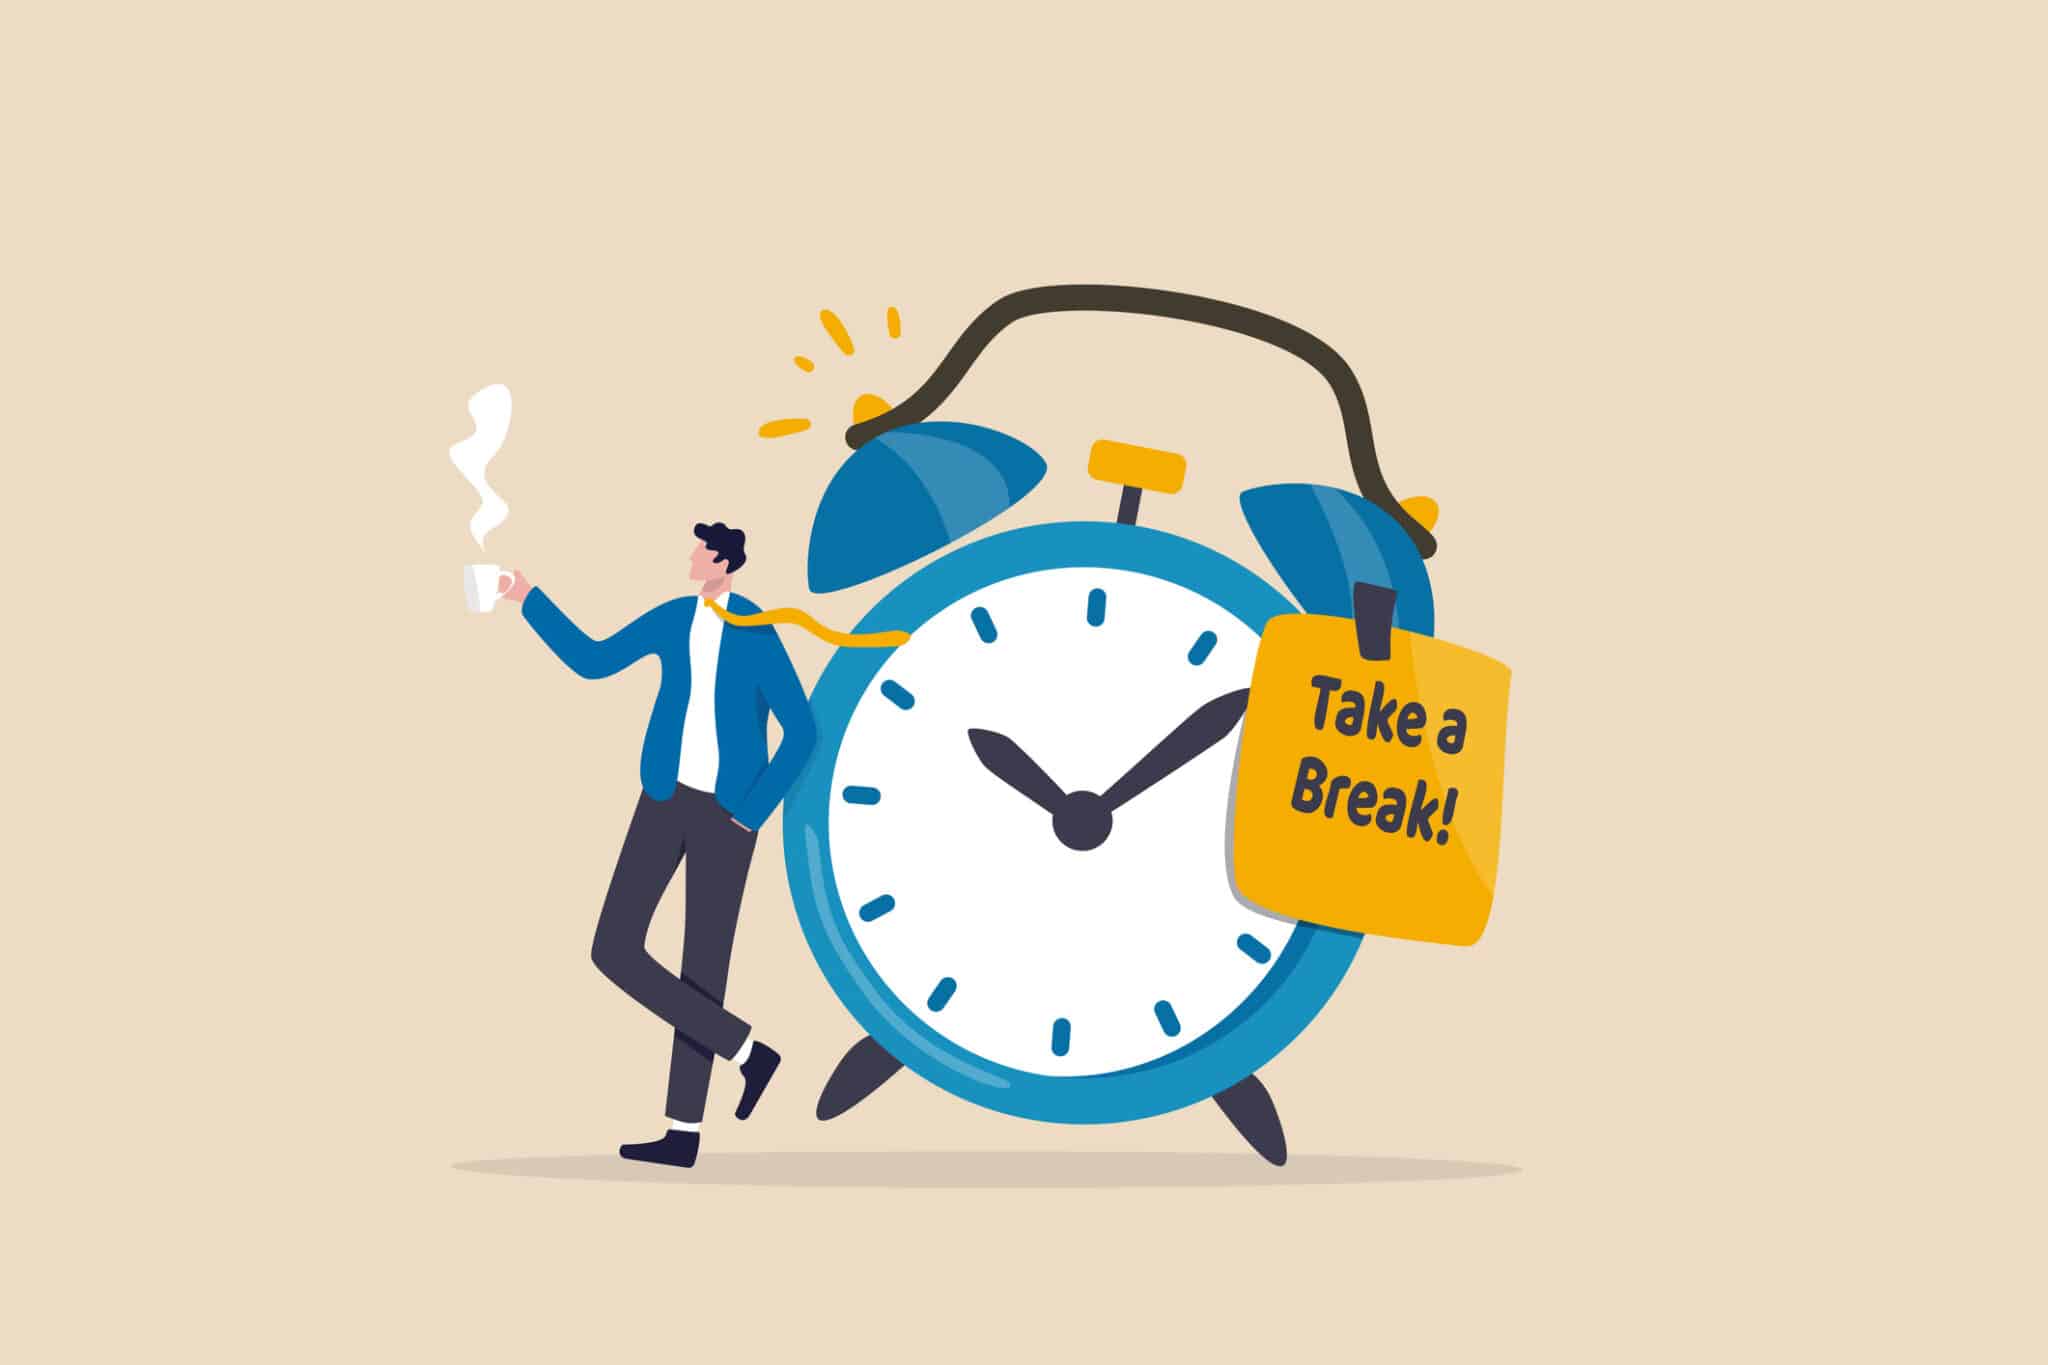 A timeless man in a suit is standing next to a clock, reminding individuals to take a break.